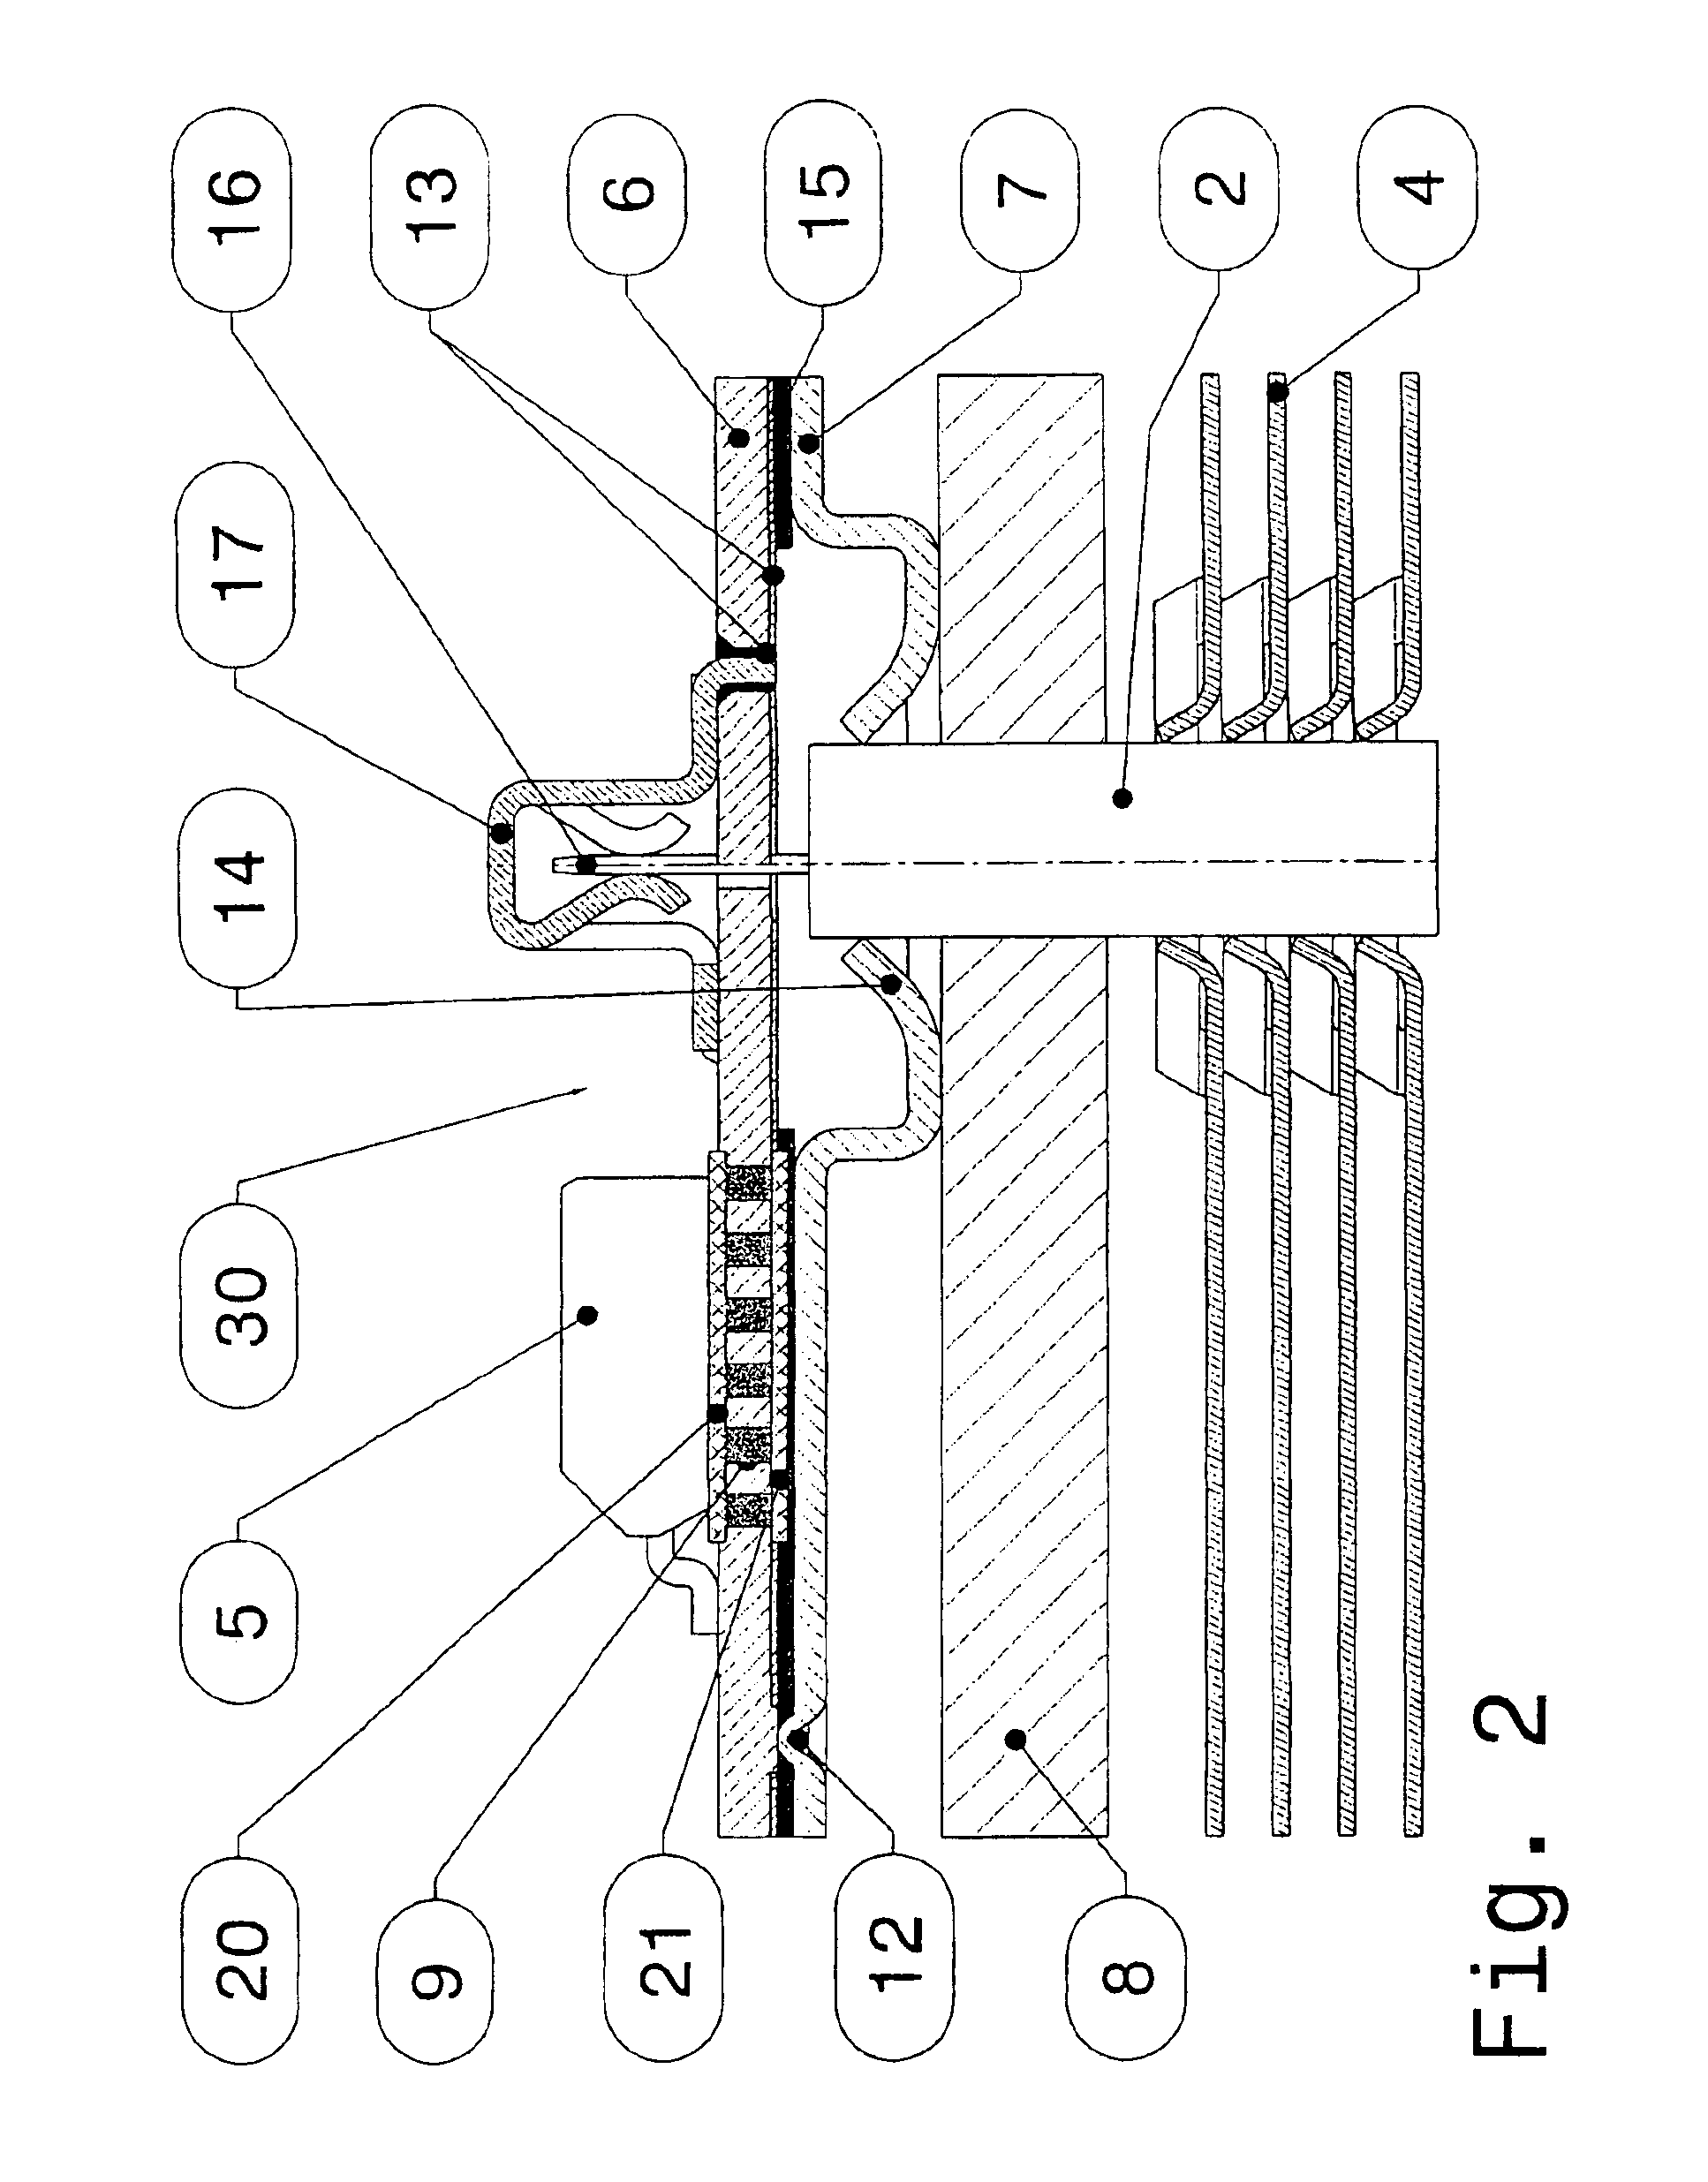 Electric heating system for a motor vehicle